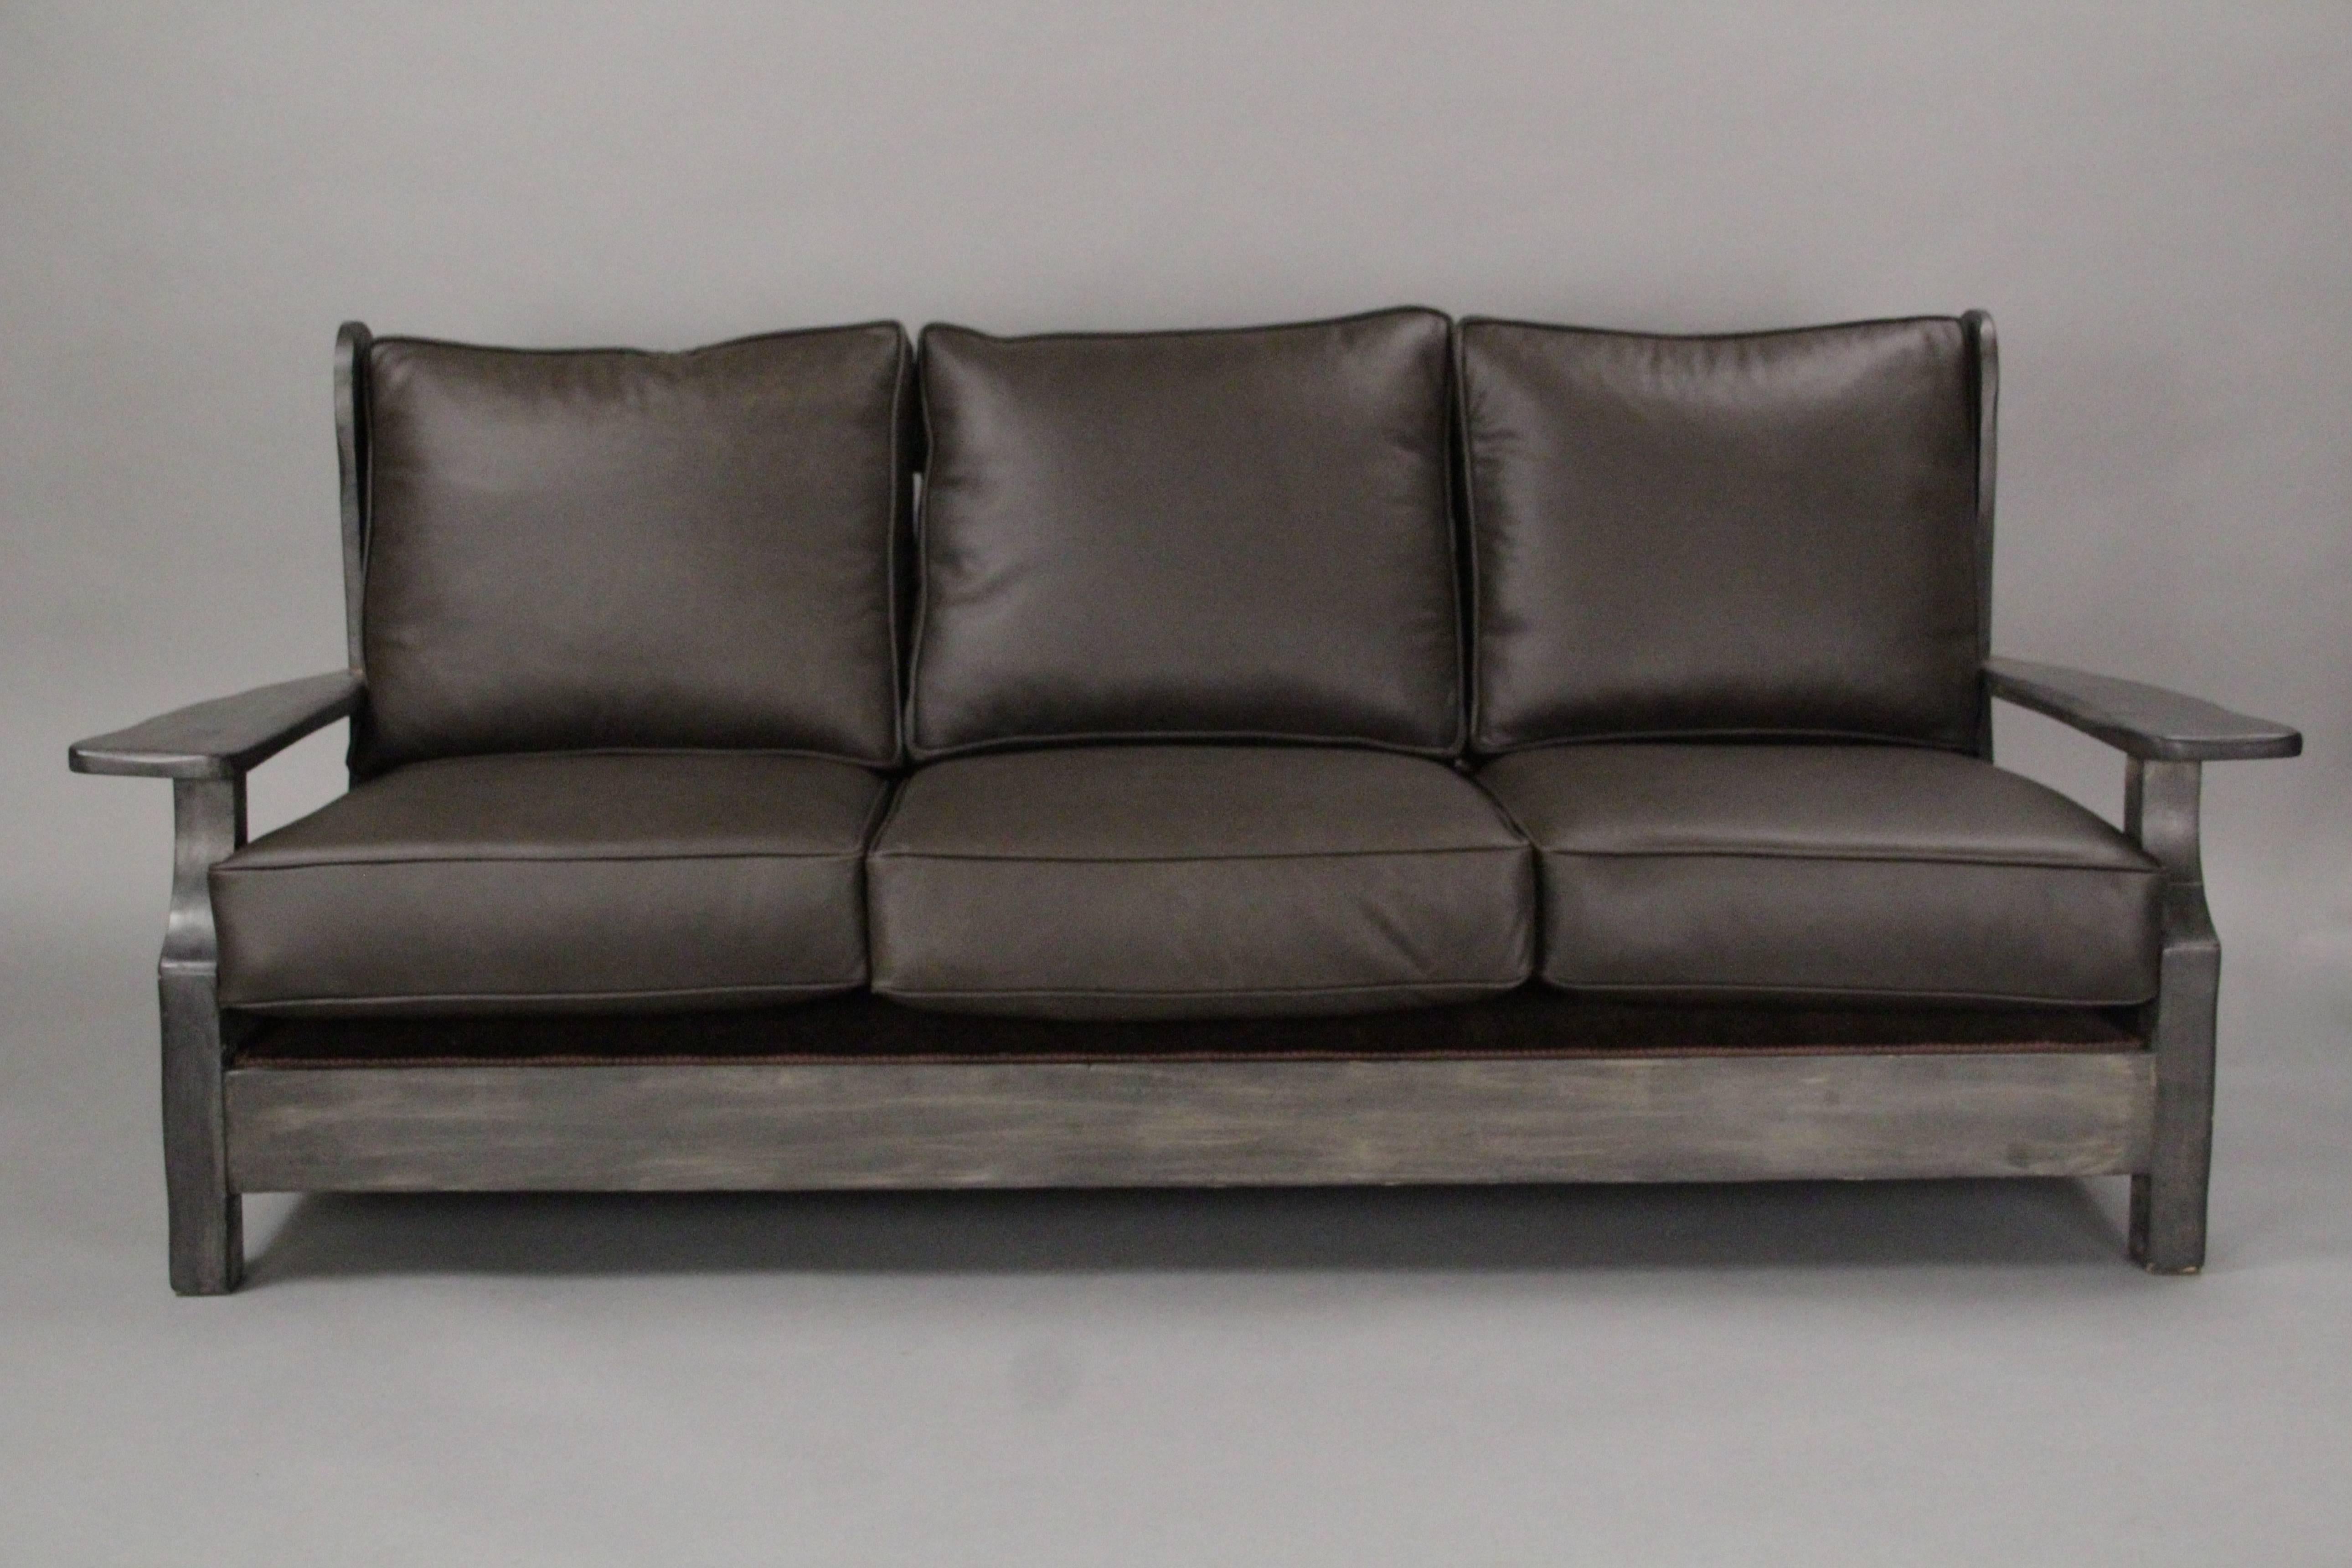 Signed Monterey sofa with new leather upholstery. Restored finish.